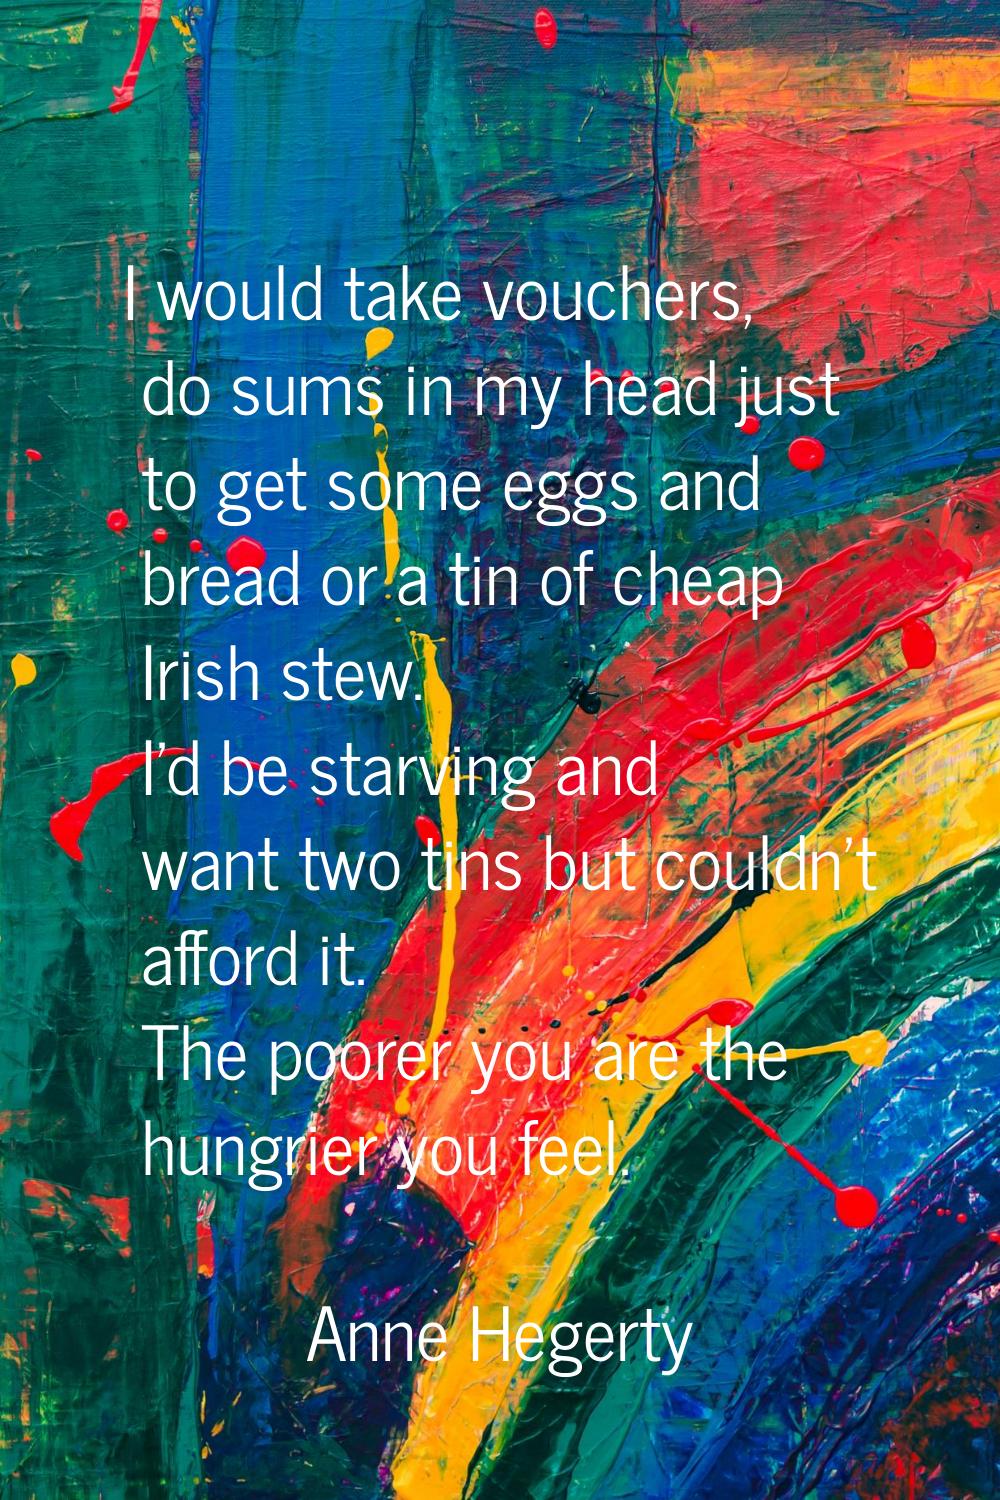 I would take vouchers, do sums in my head just to get some eggs and bread or a tin of cheap Irish s